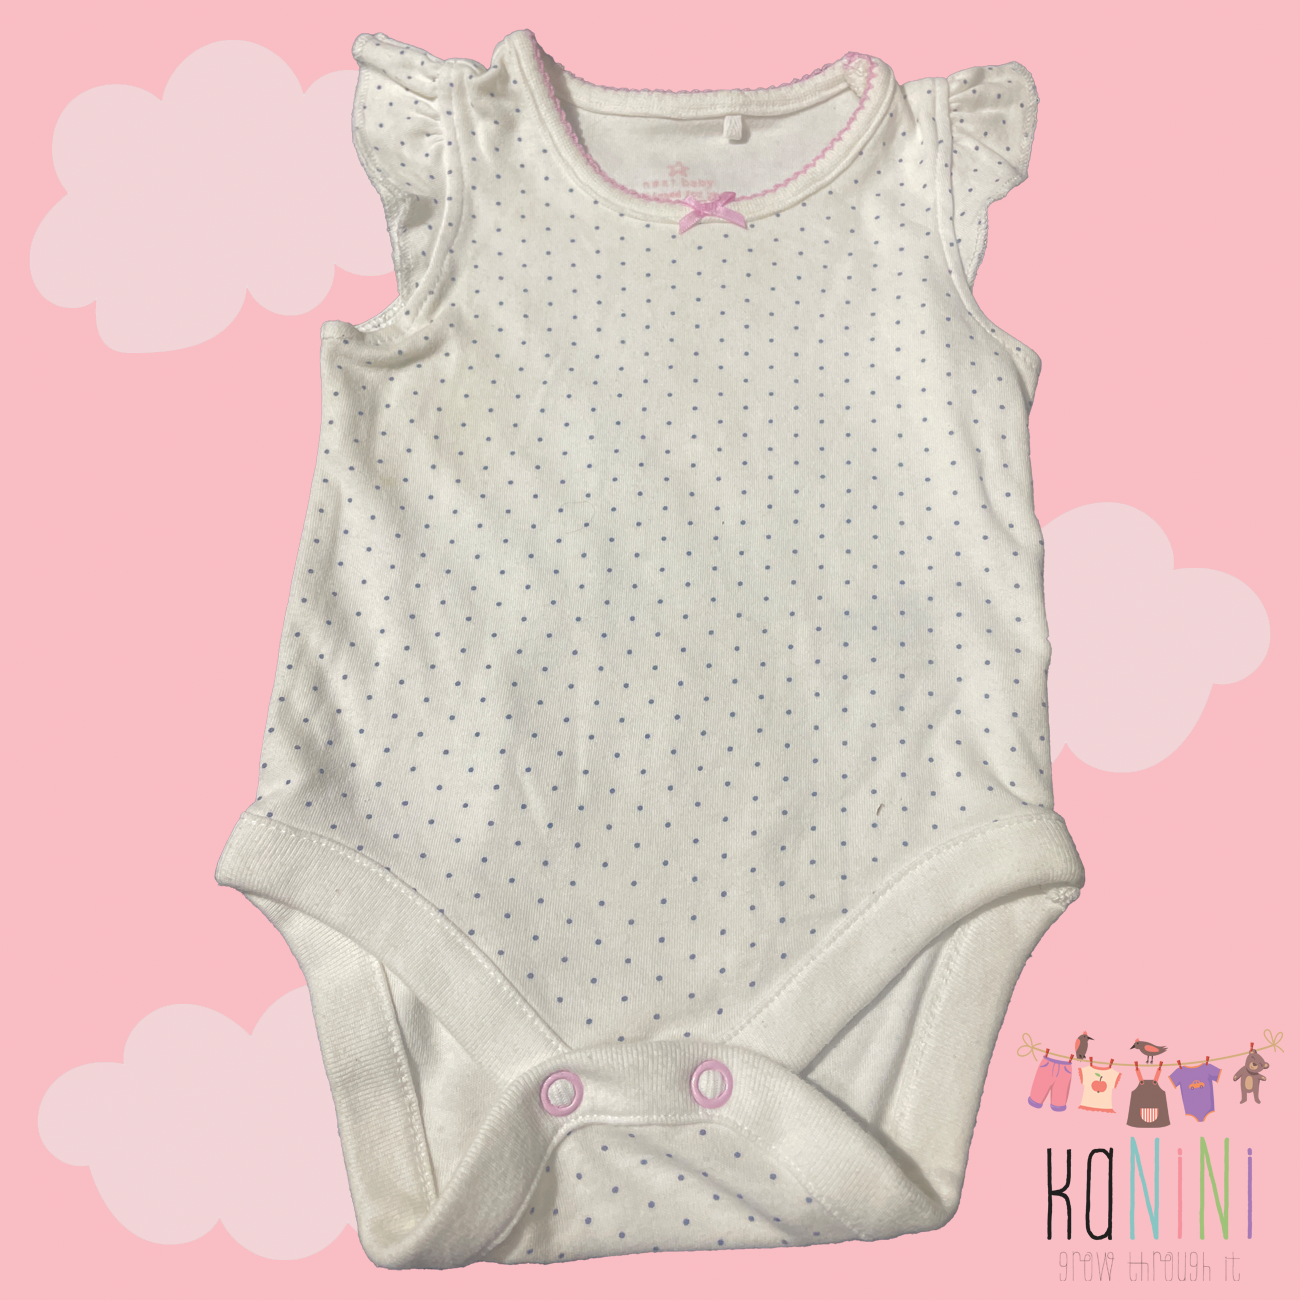 Featured image for “UK Next 0 - 3 Months Girls Polkadot Romper”